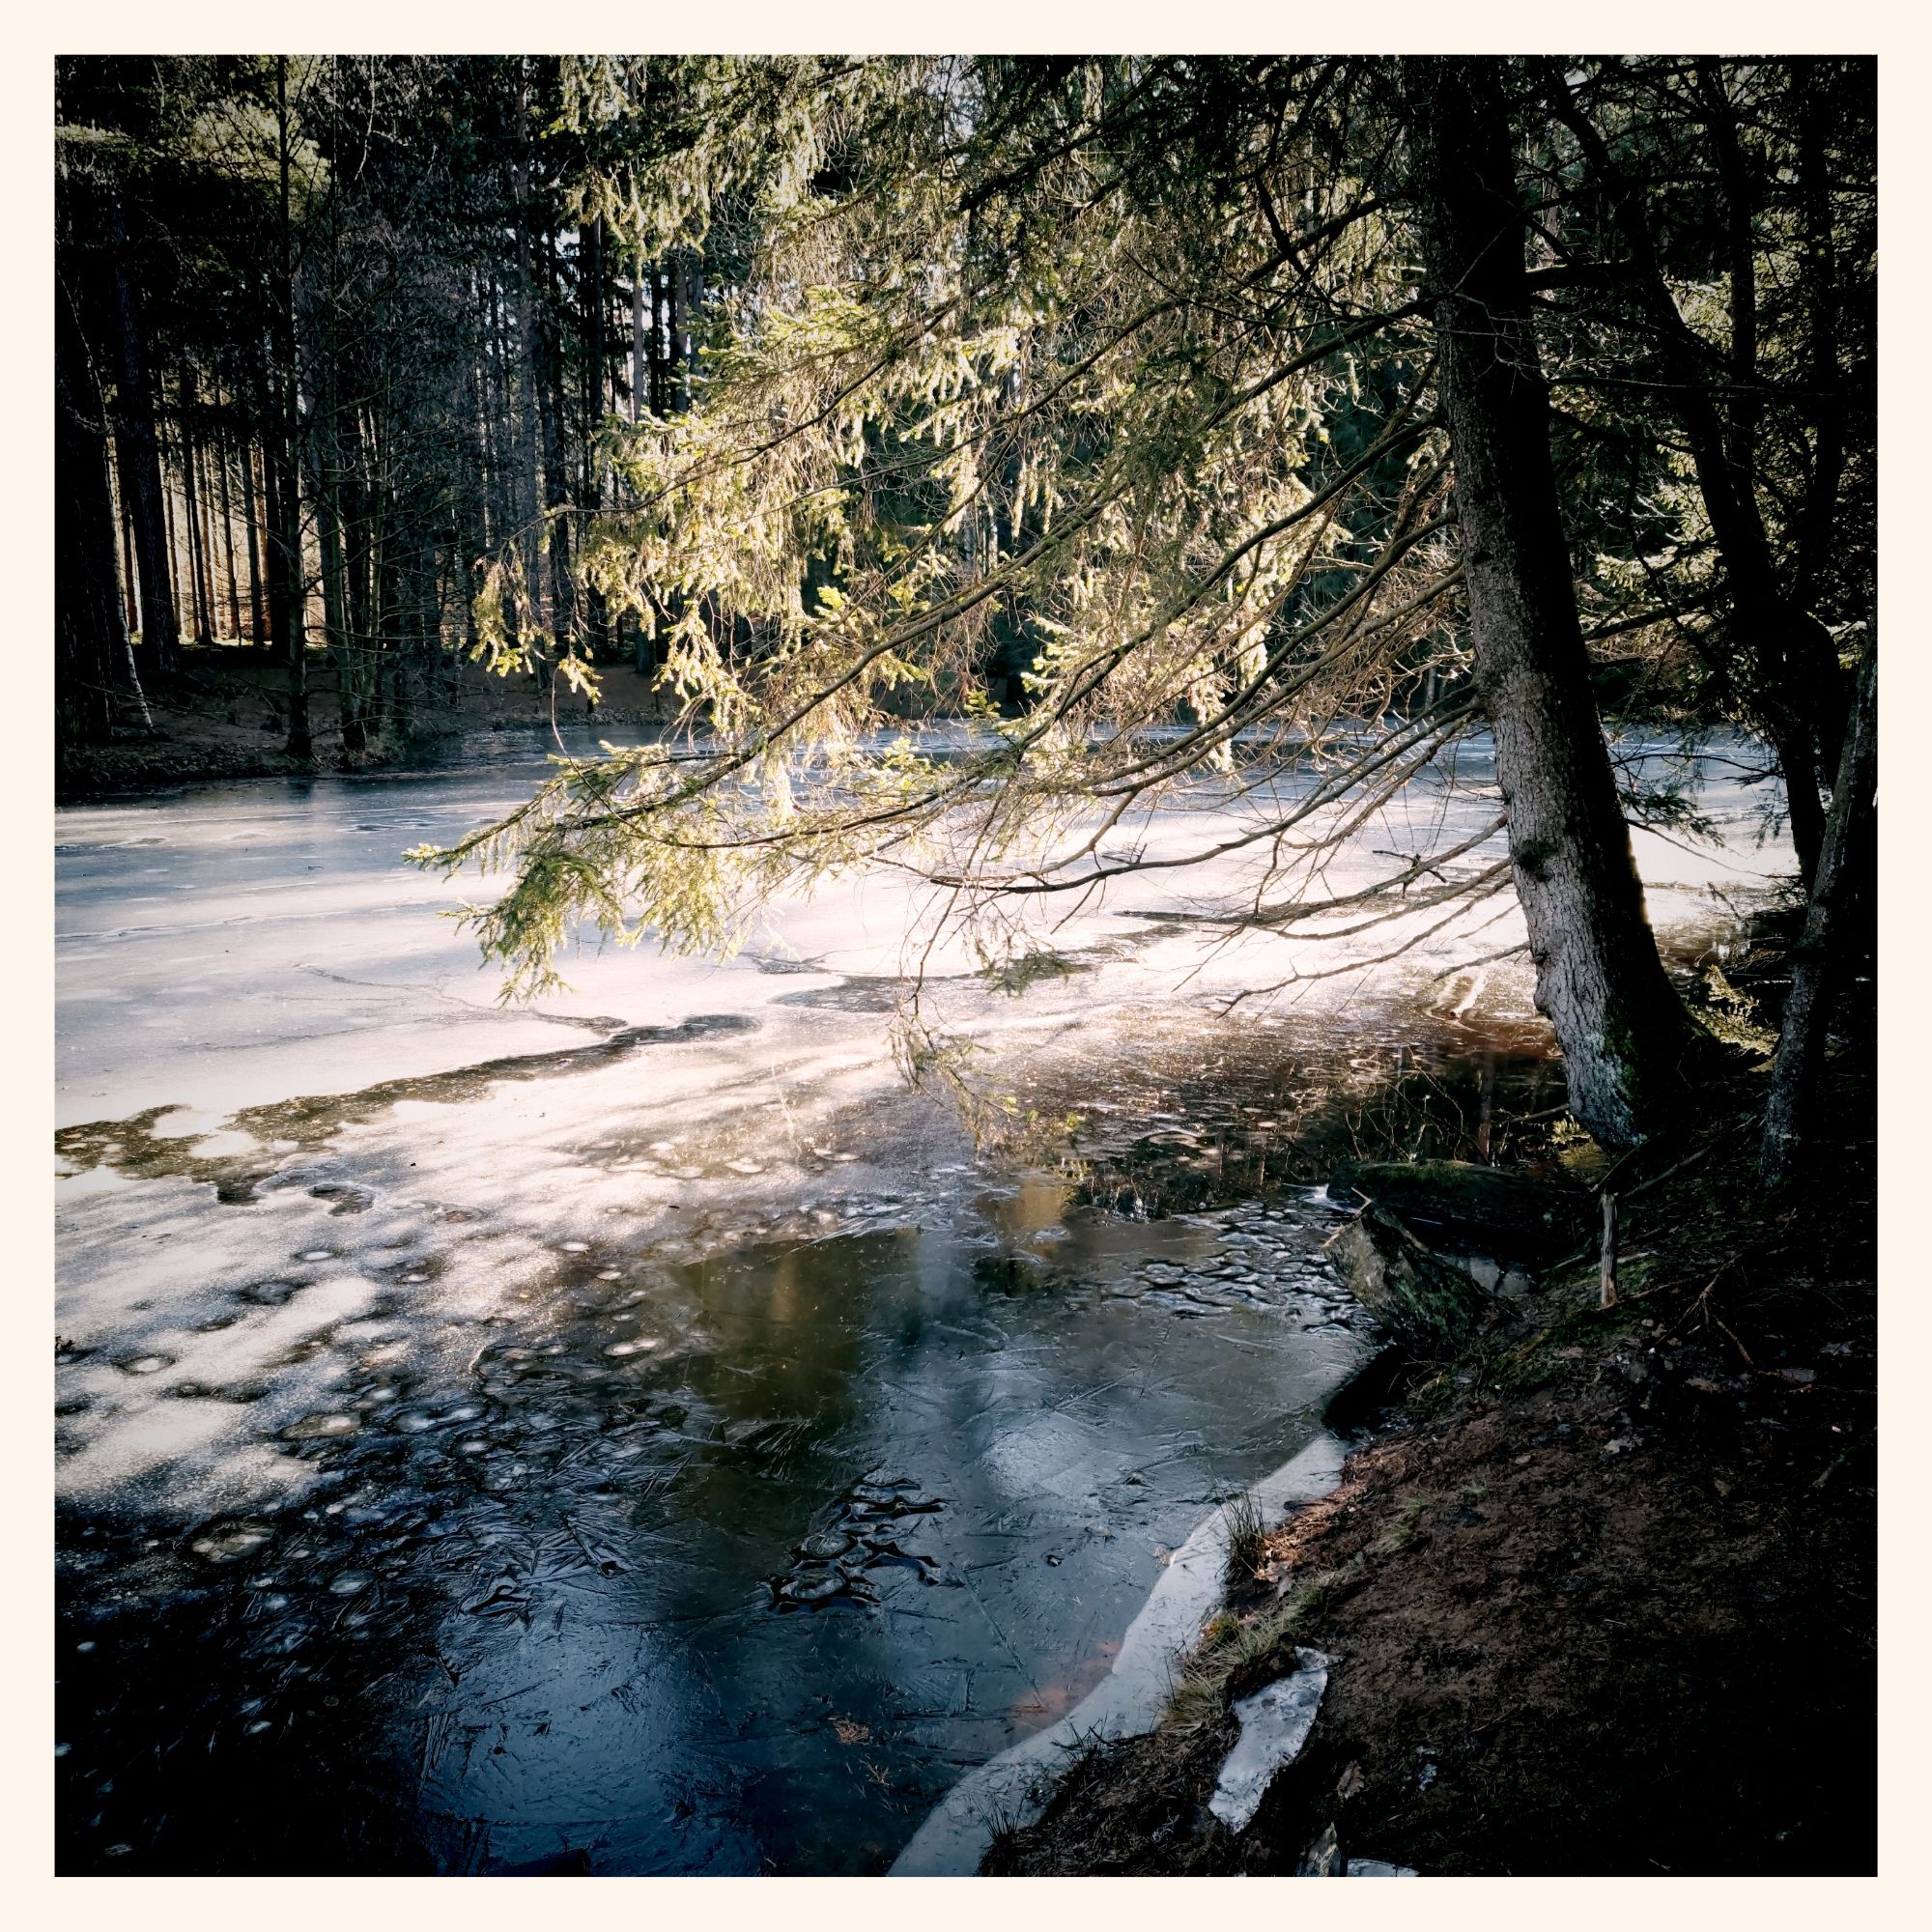 Fir trees surrounding a frozen lake, sun reflected by the ice.